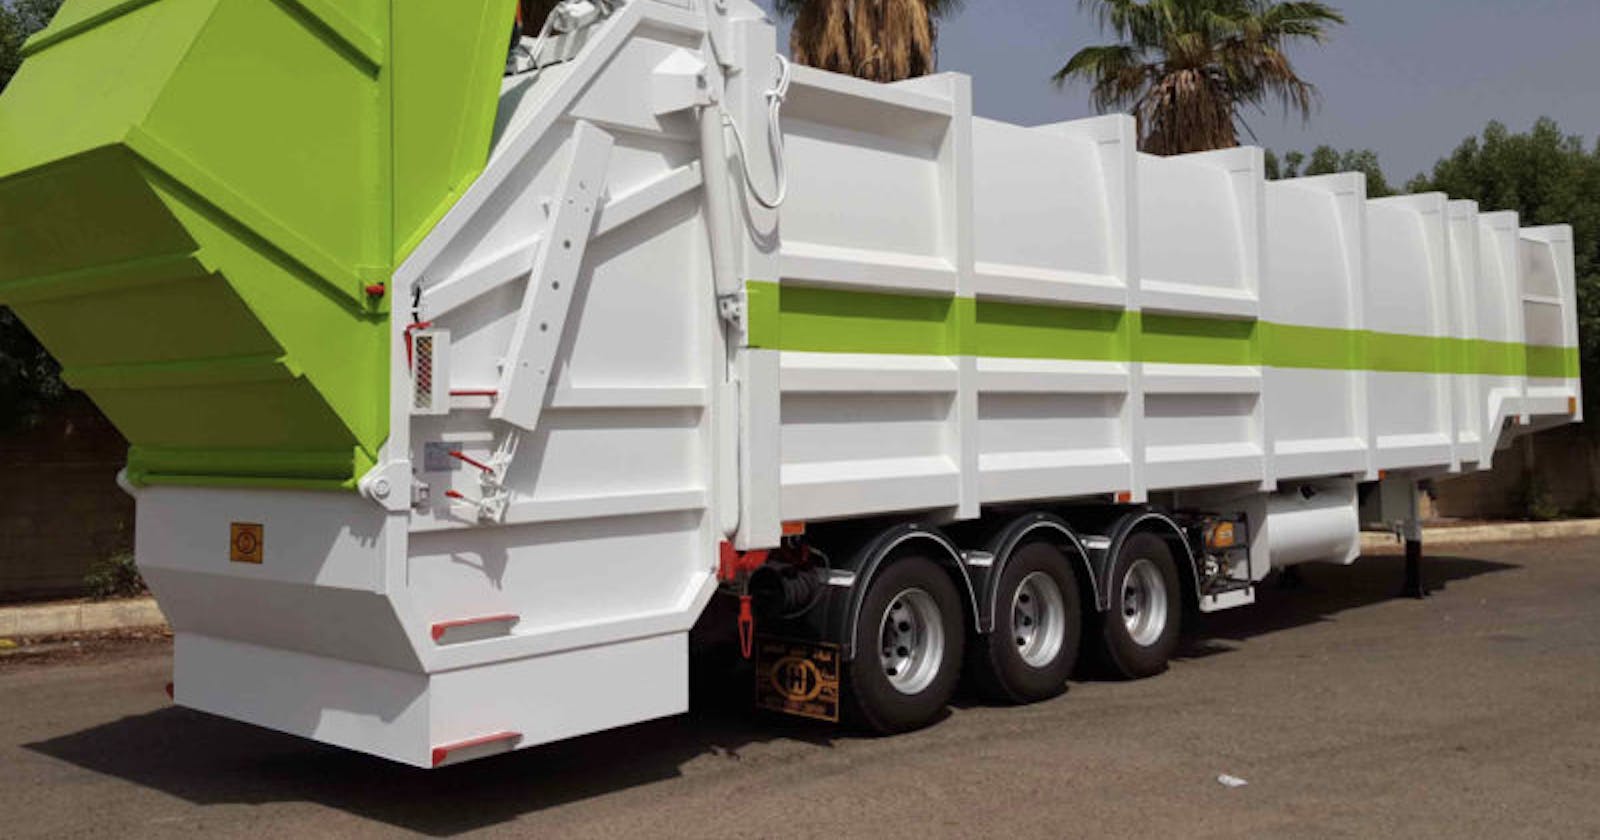 Factors to Make Selection of Custom Truck Supplier Worthwhile